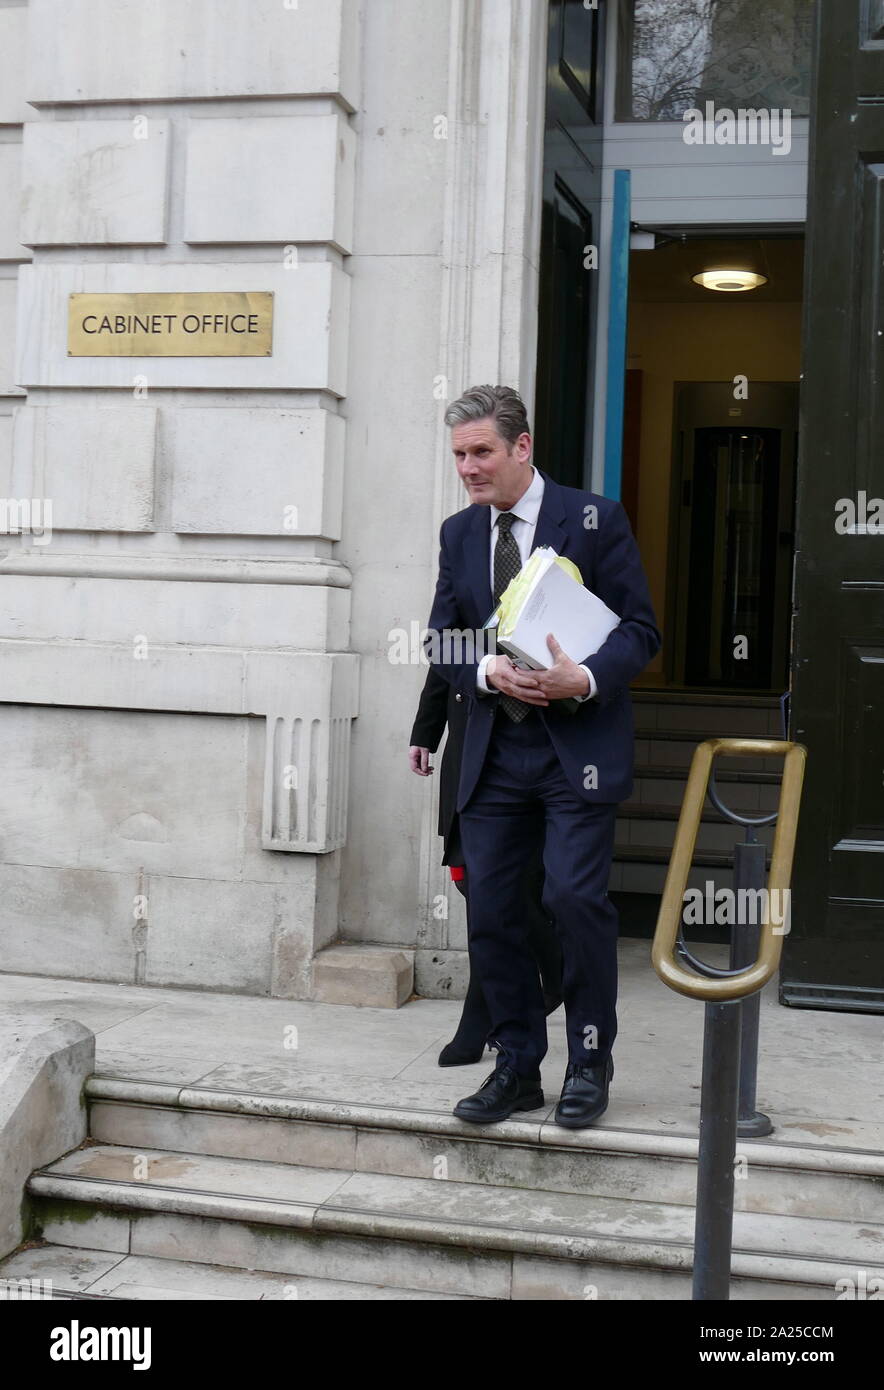 Keir Starmer , the leader of the Labour Party Brexit talks team, leaves the Cabinet Office after talks with the Conservative Government, 4 April 2019. Stock Photo